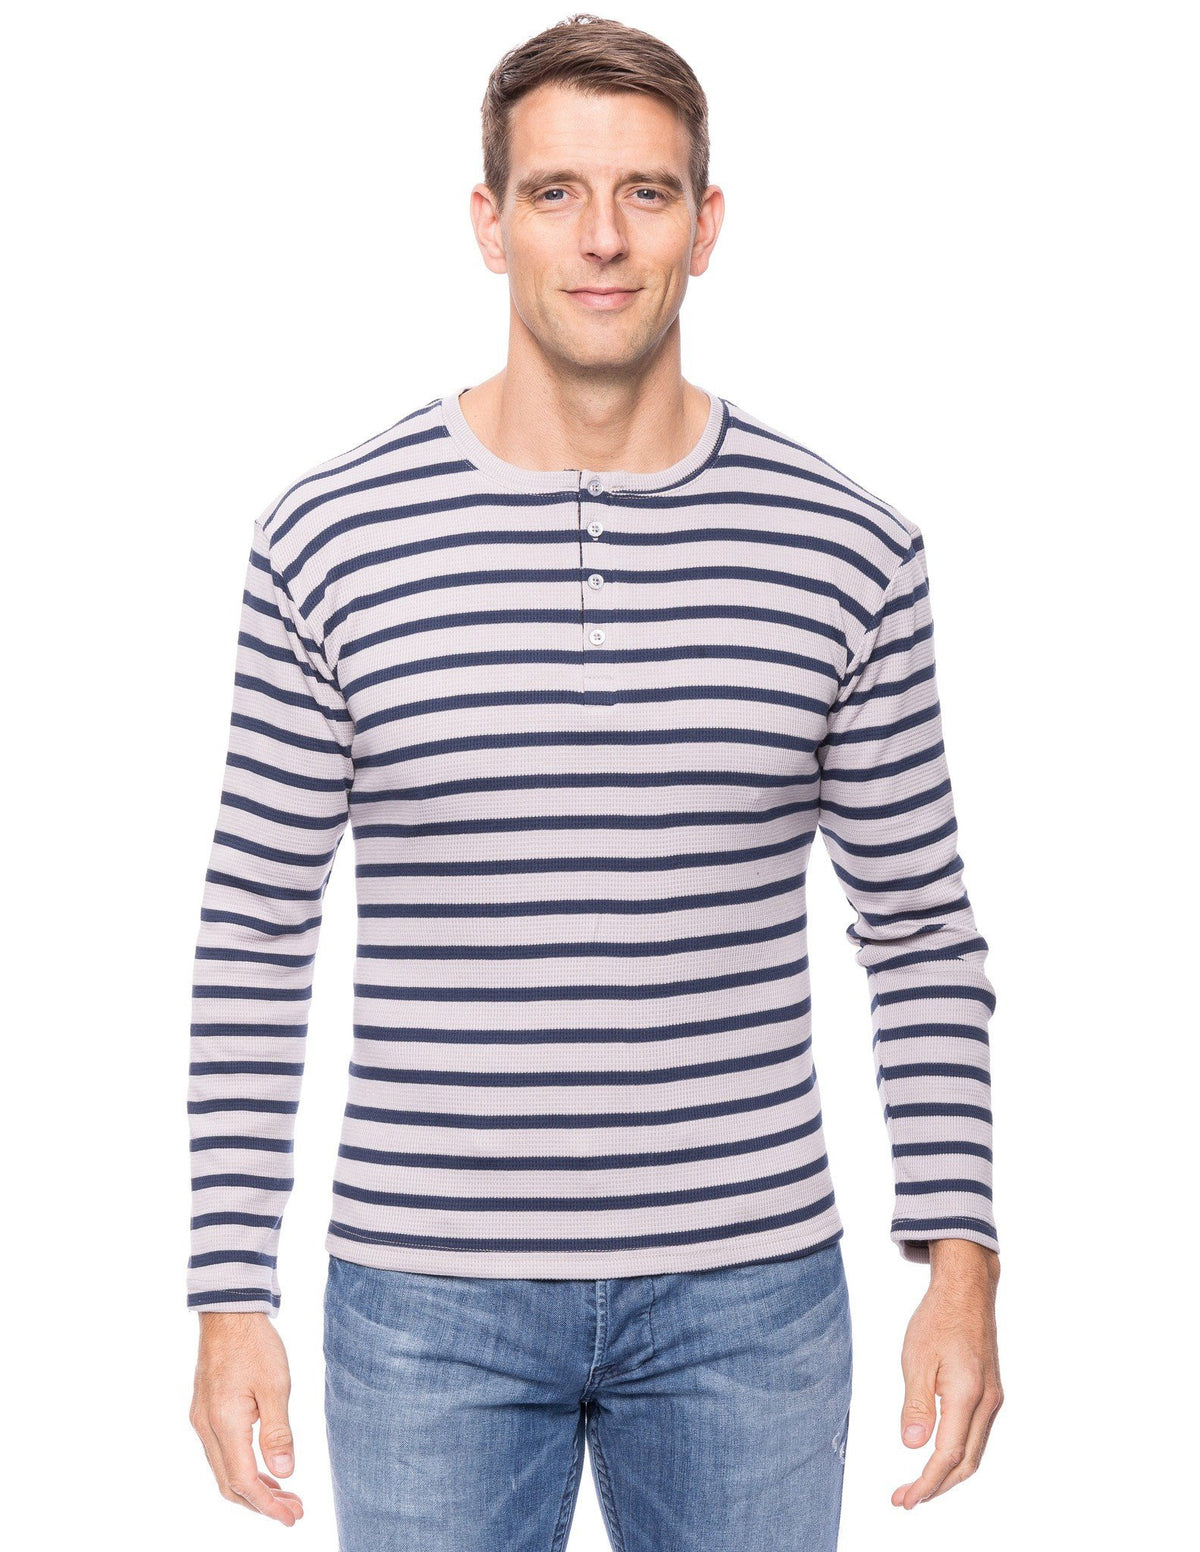 Men's Solid Thermal Henley Long Sleeve T-shirts - Stripes Heather Grey/Navy